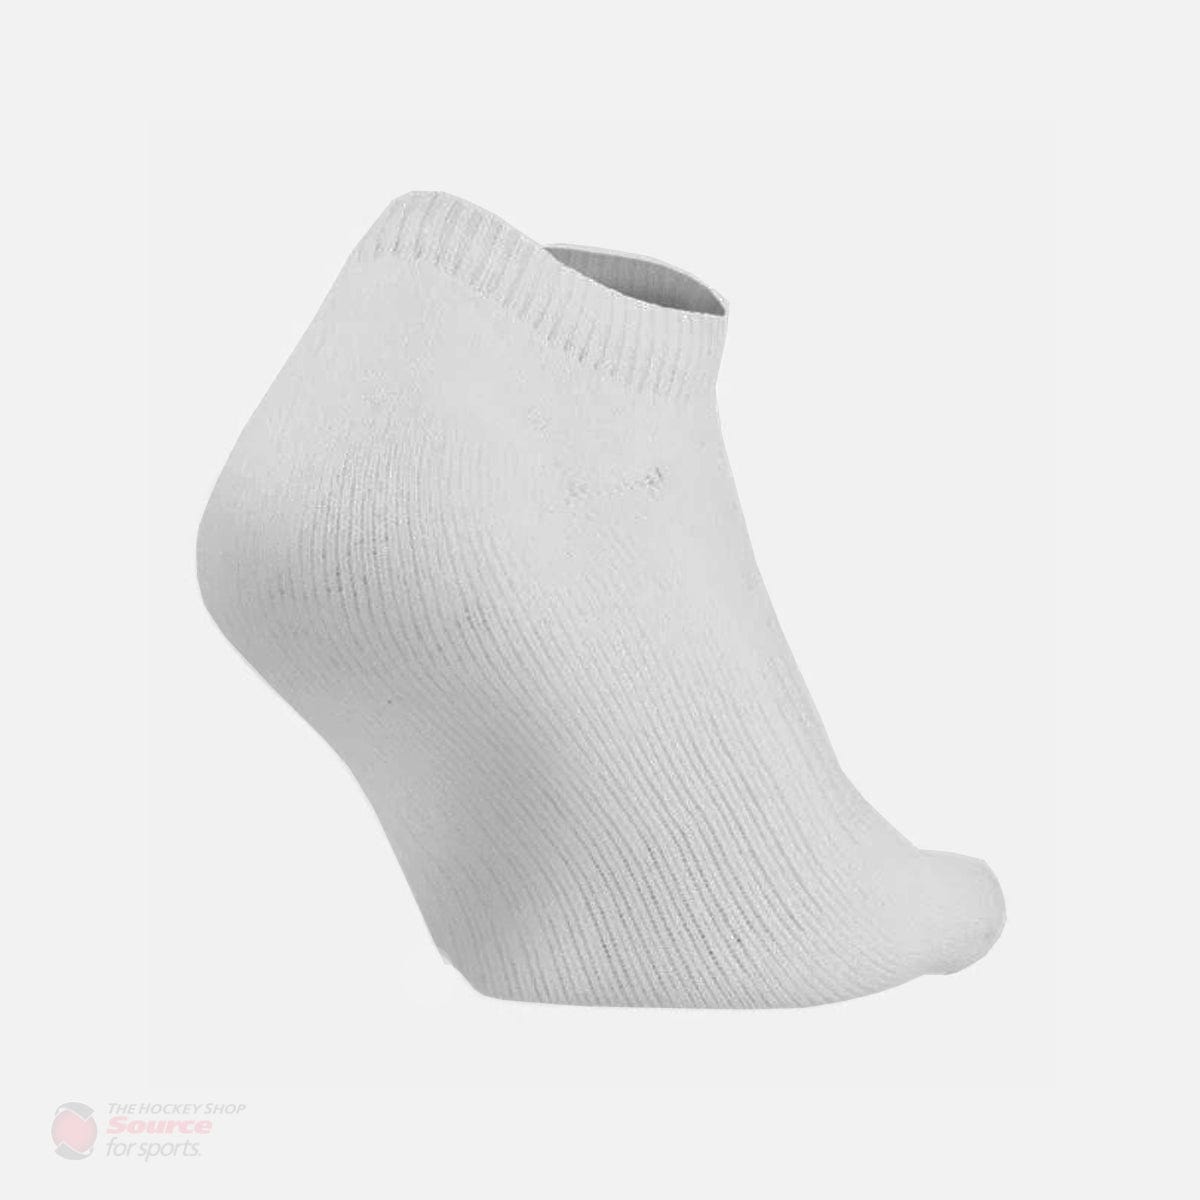 Under Armour Charged Cotton No Show White Performance Socks - 6 Pack